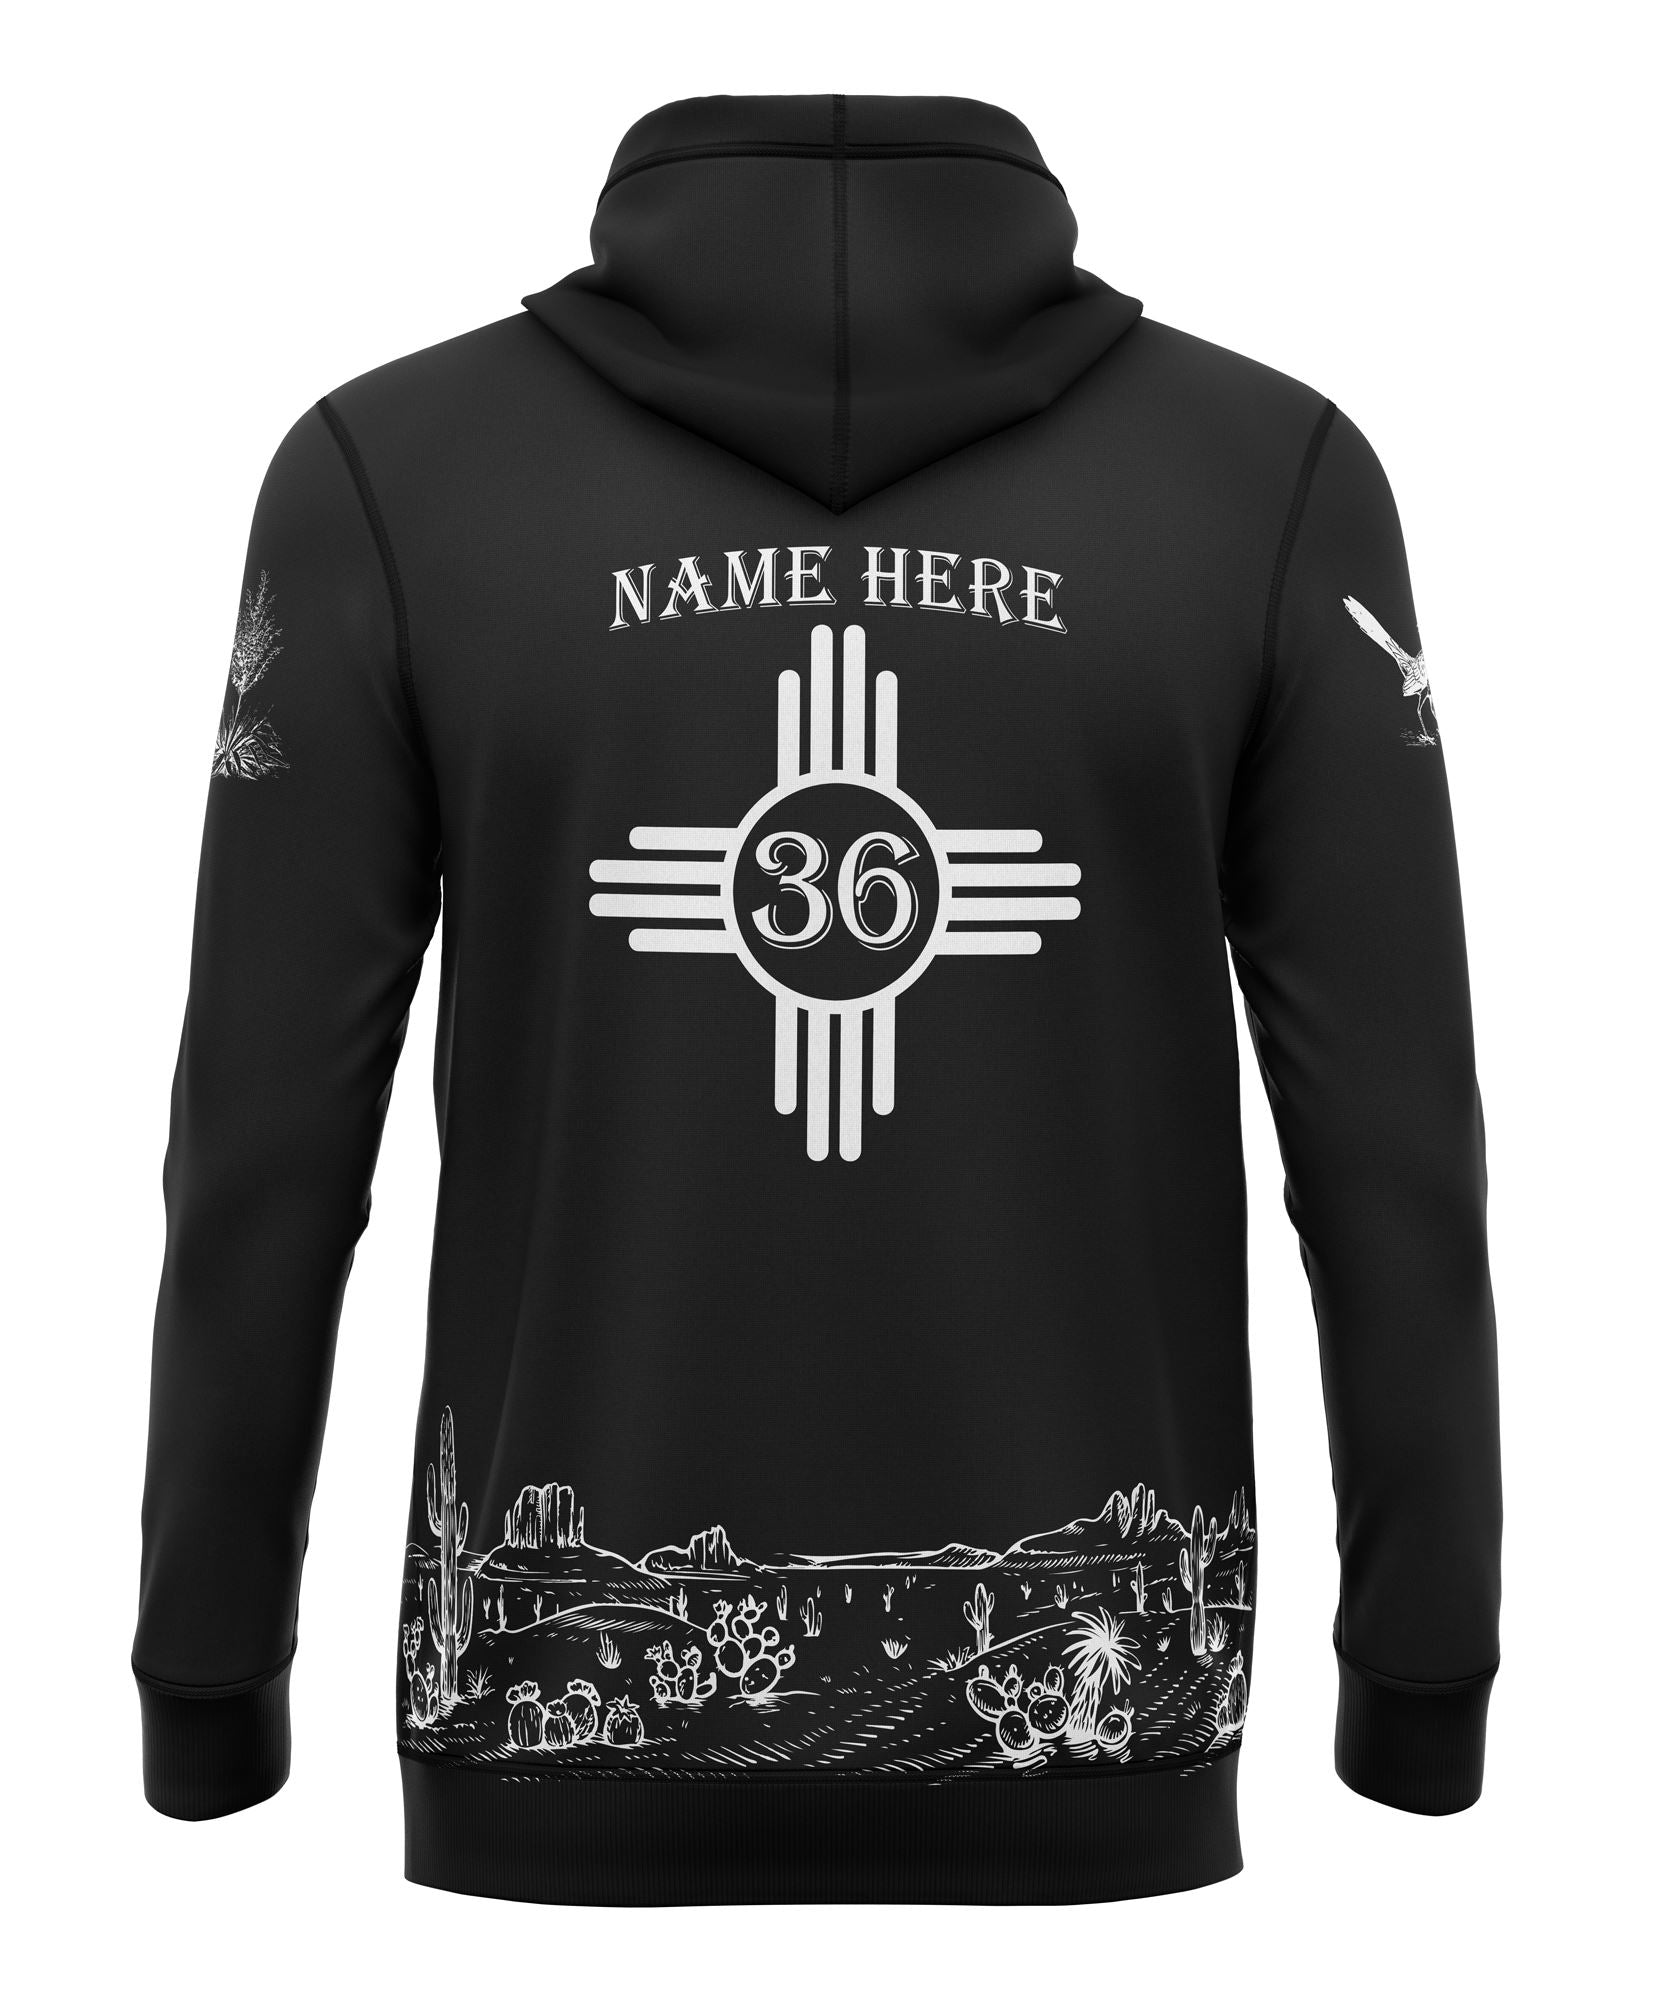 New Mexico Hoodie